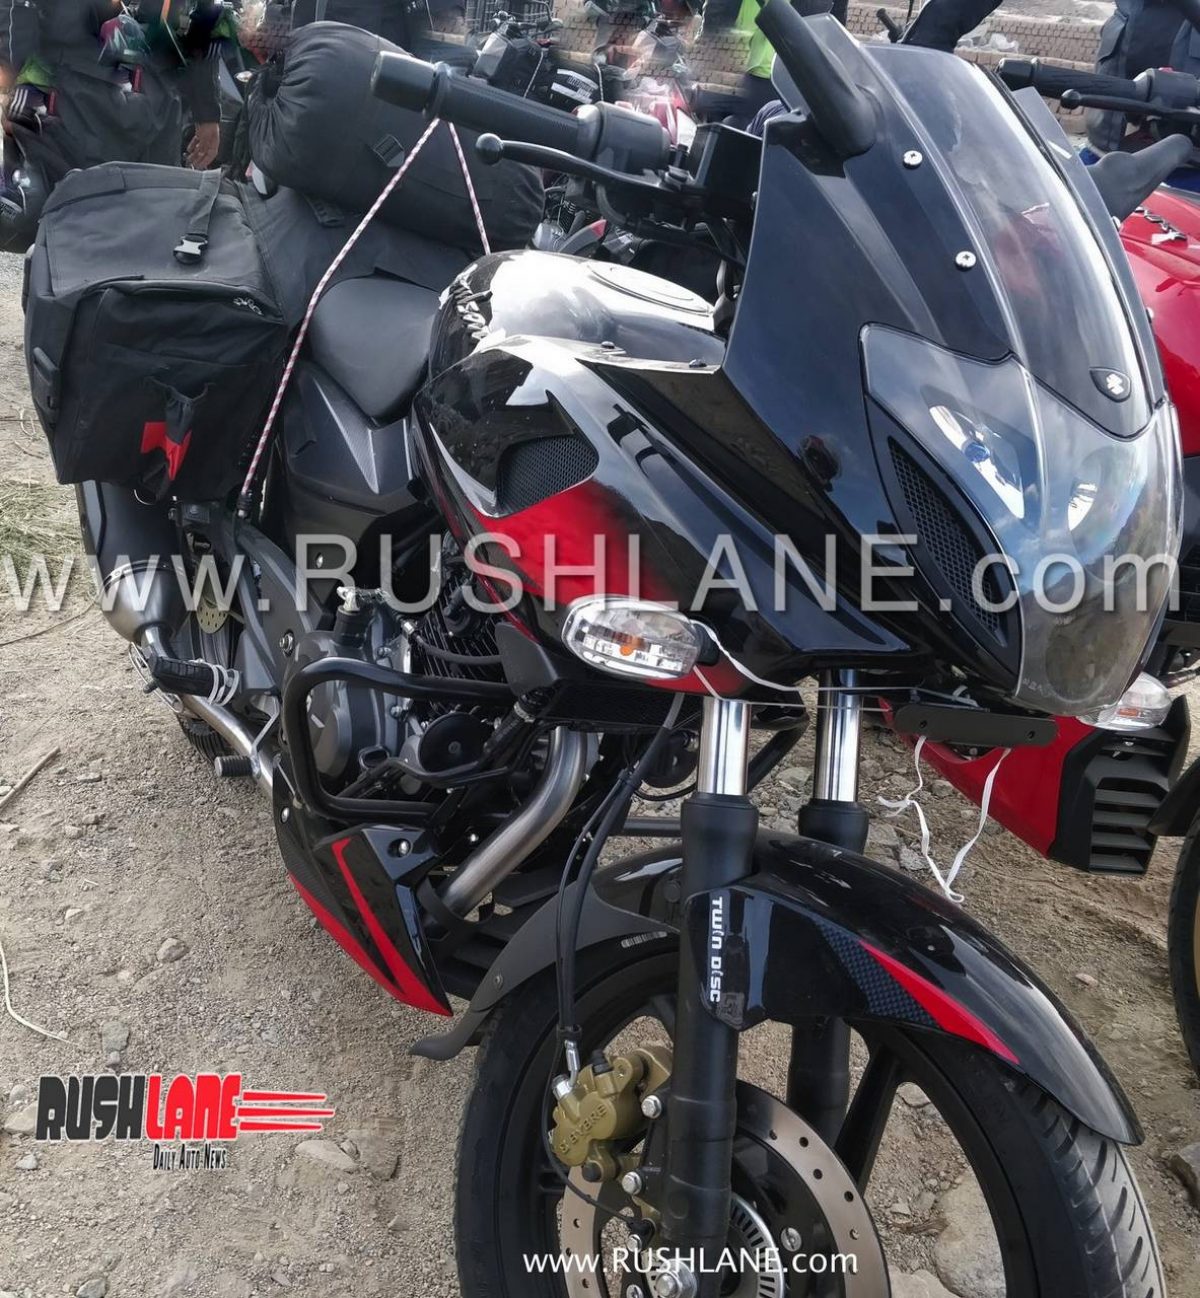 2019 Bajaj Pulsar 220f Abs Launch Soon Spied For The First Time